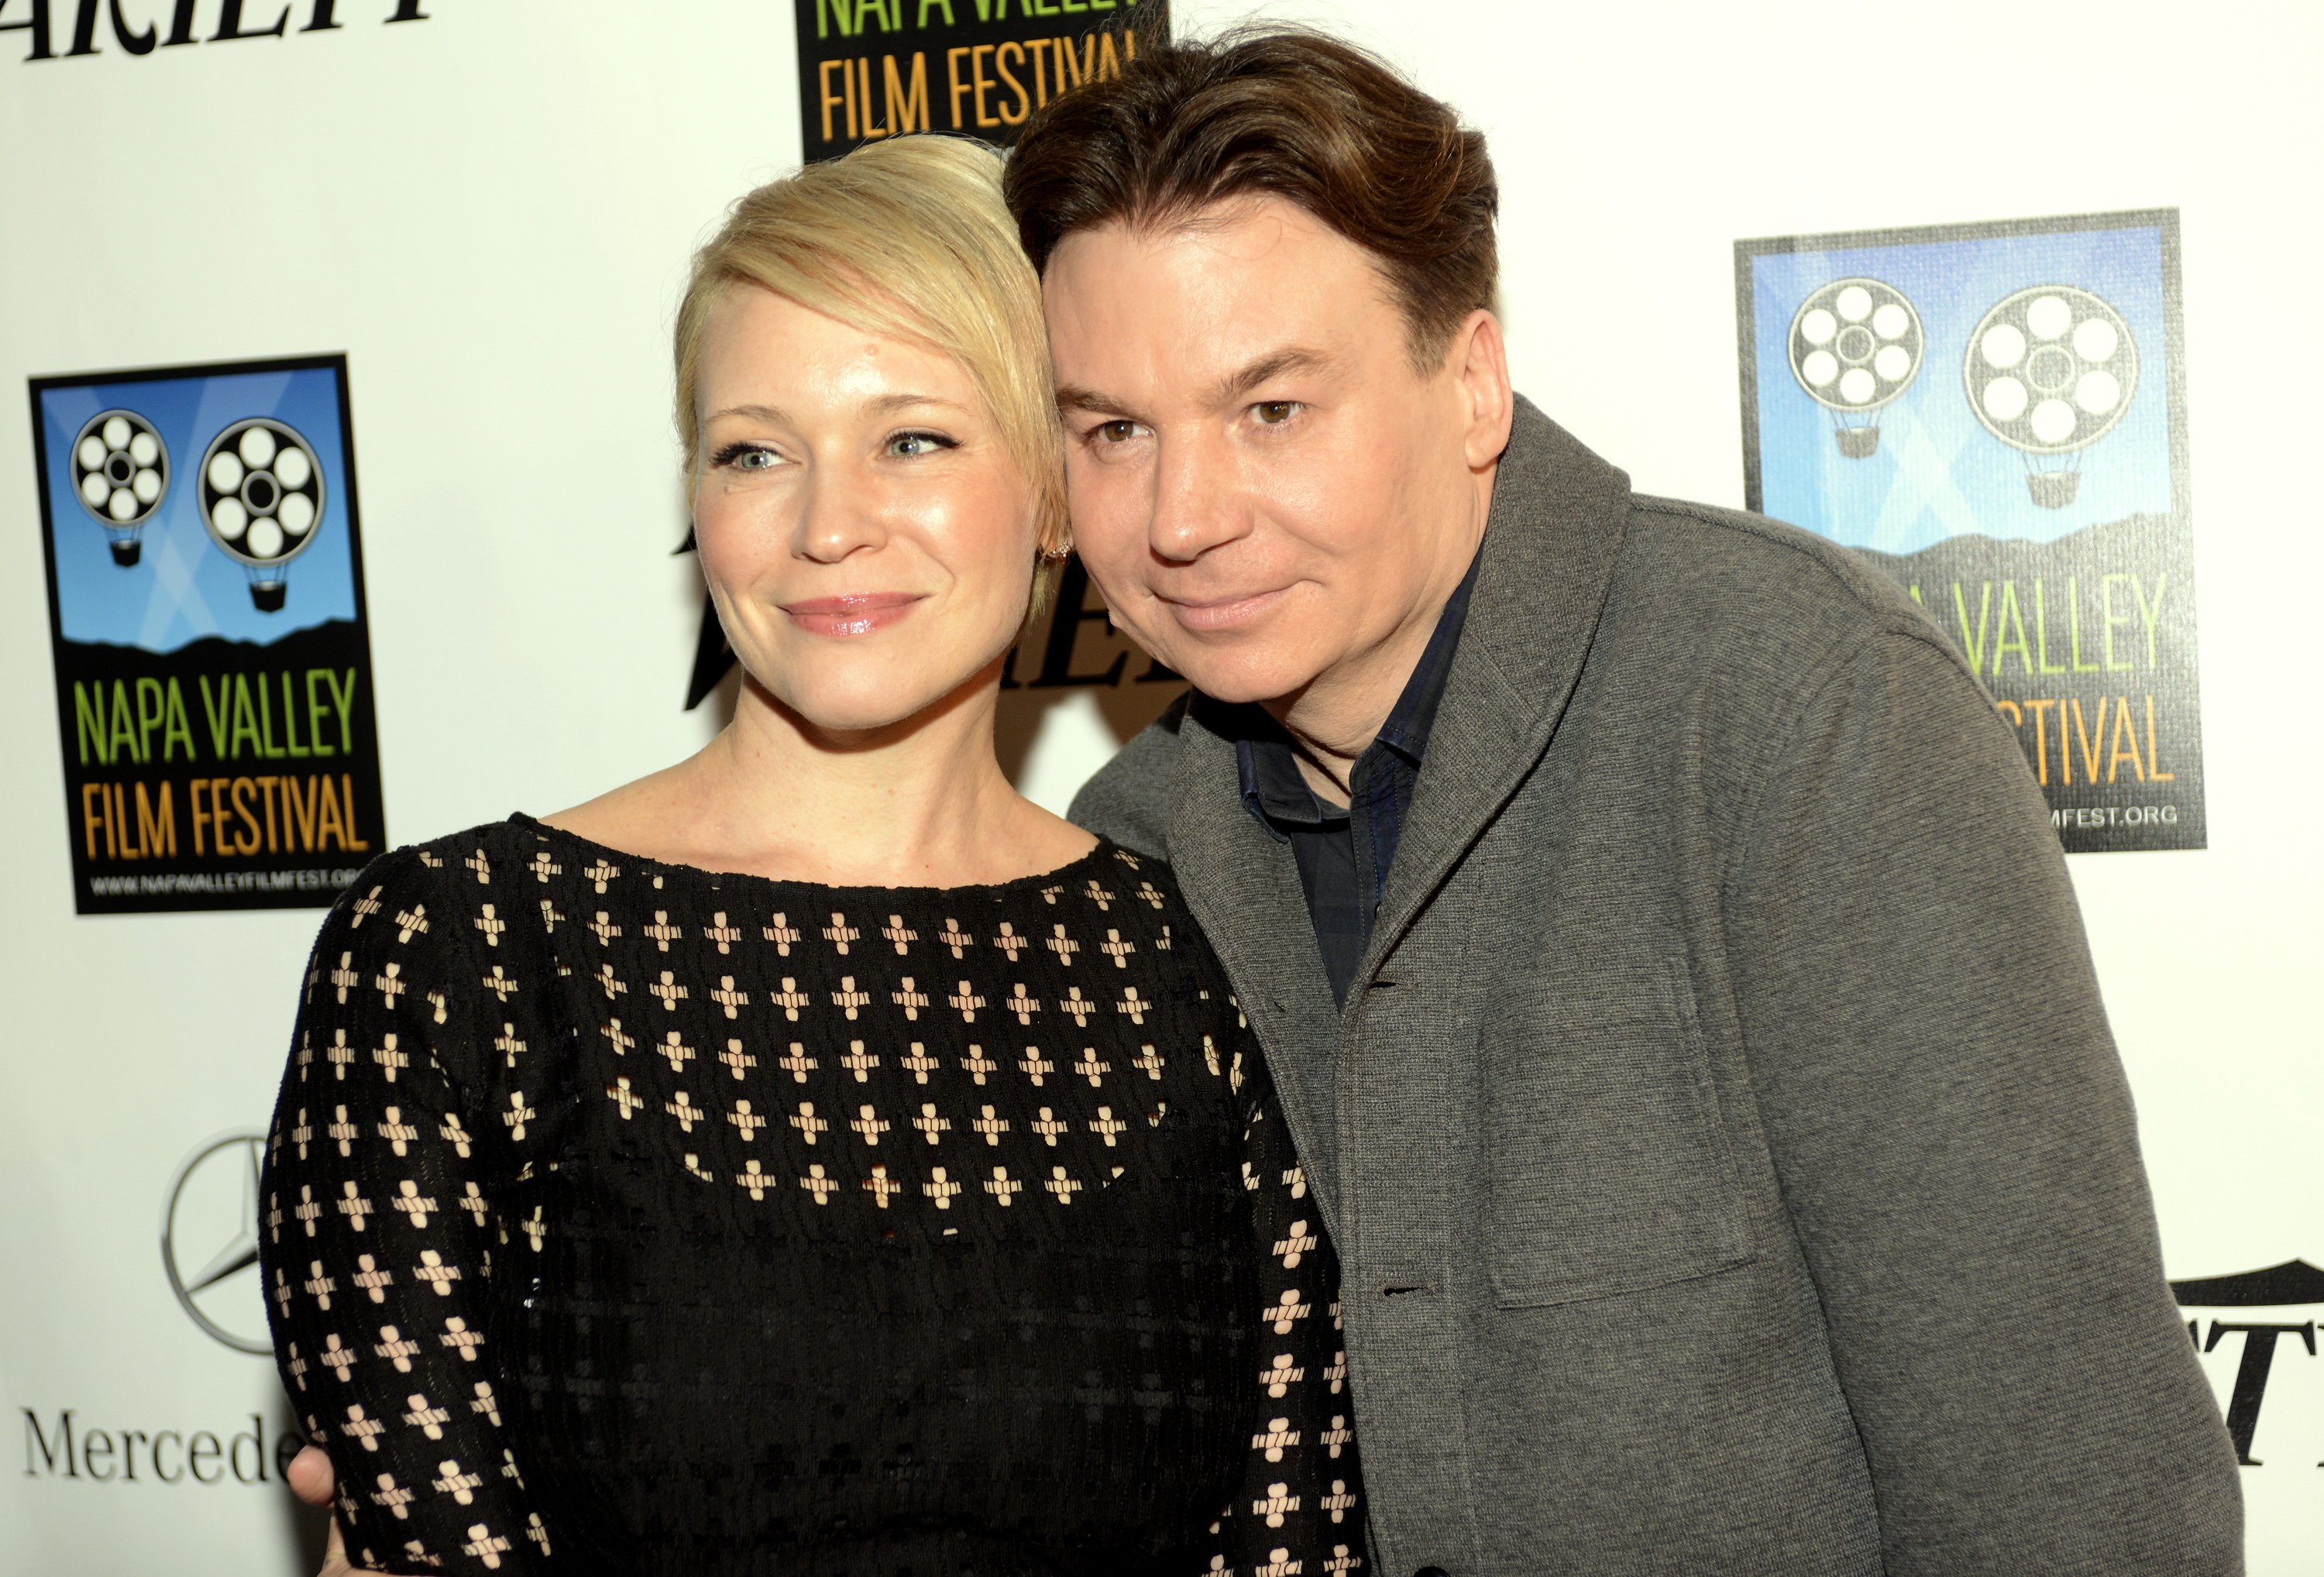 Kelly Tisdale and Mike Myers at the Napa Valley Film Festival gala on November 13, 2014, in California | Source: Getty Images